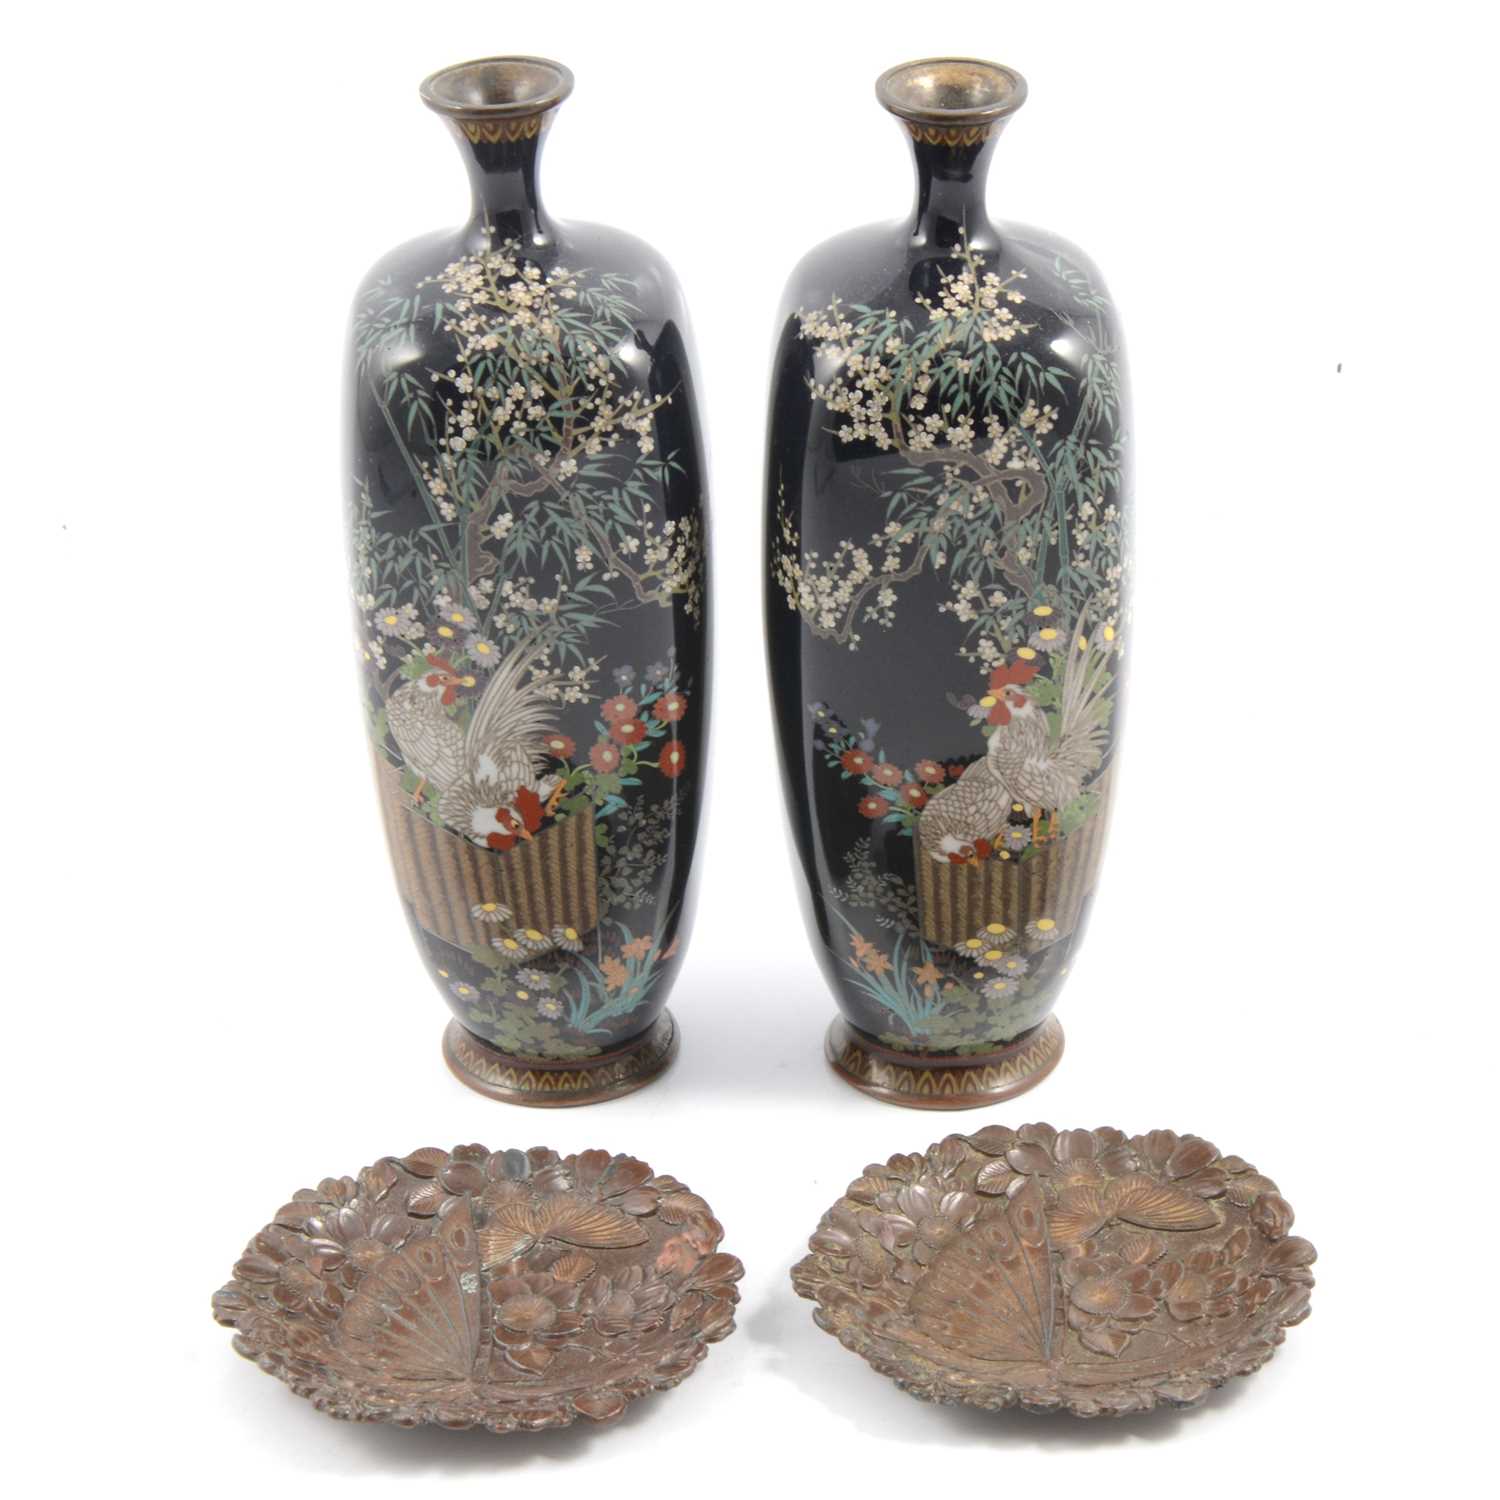 Lot 16 - Pair of Japanese cloisonne vases with cockerels, and a pair of cast metal coasters